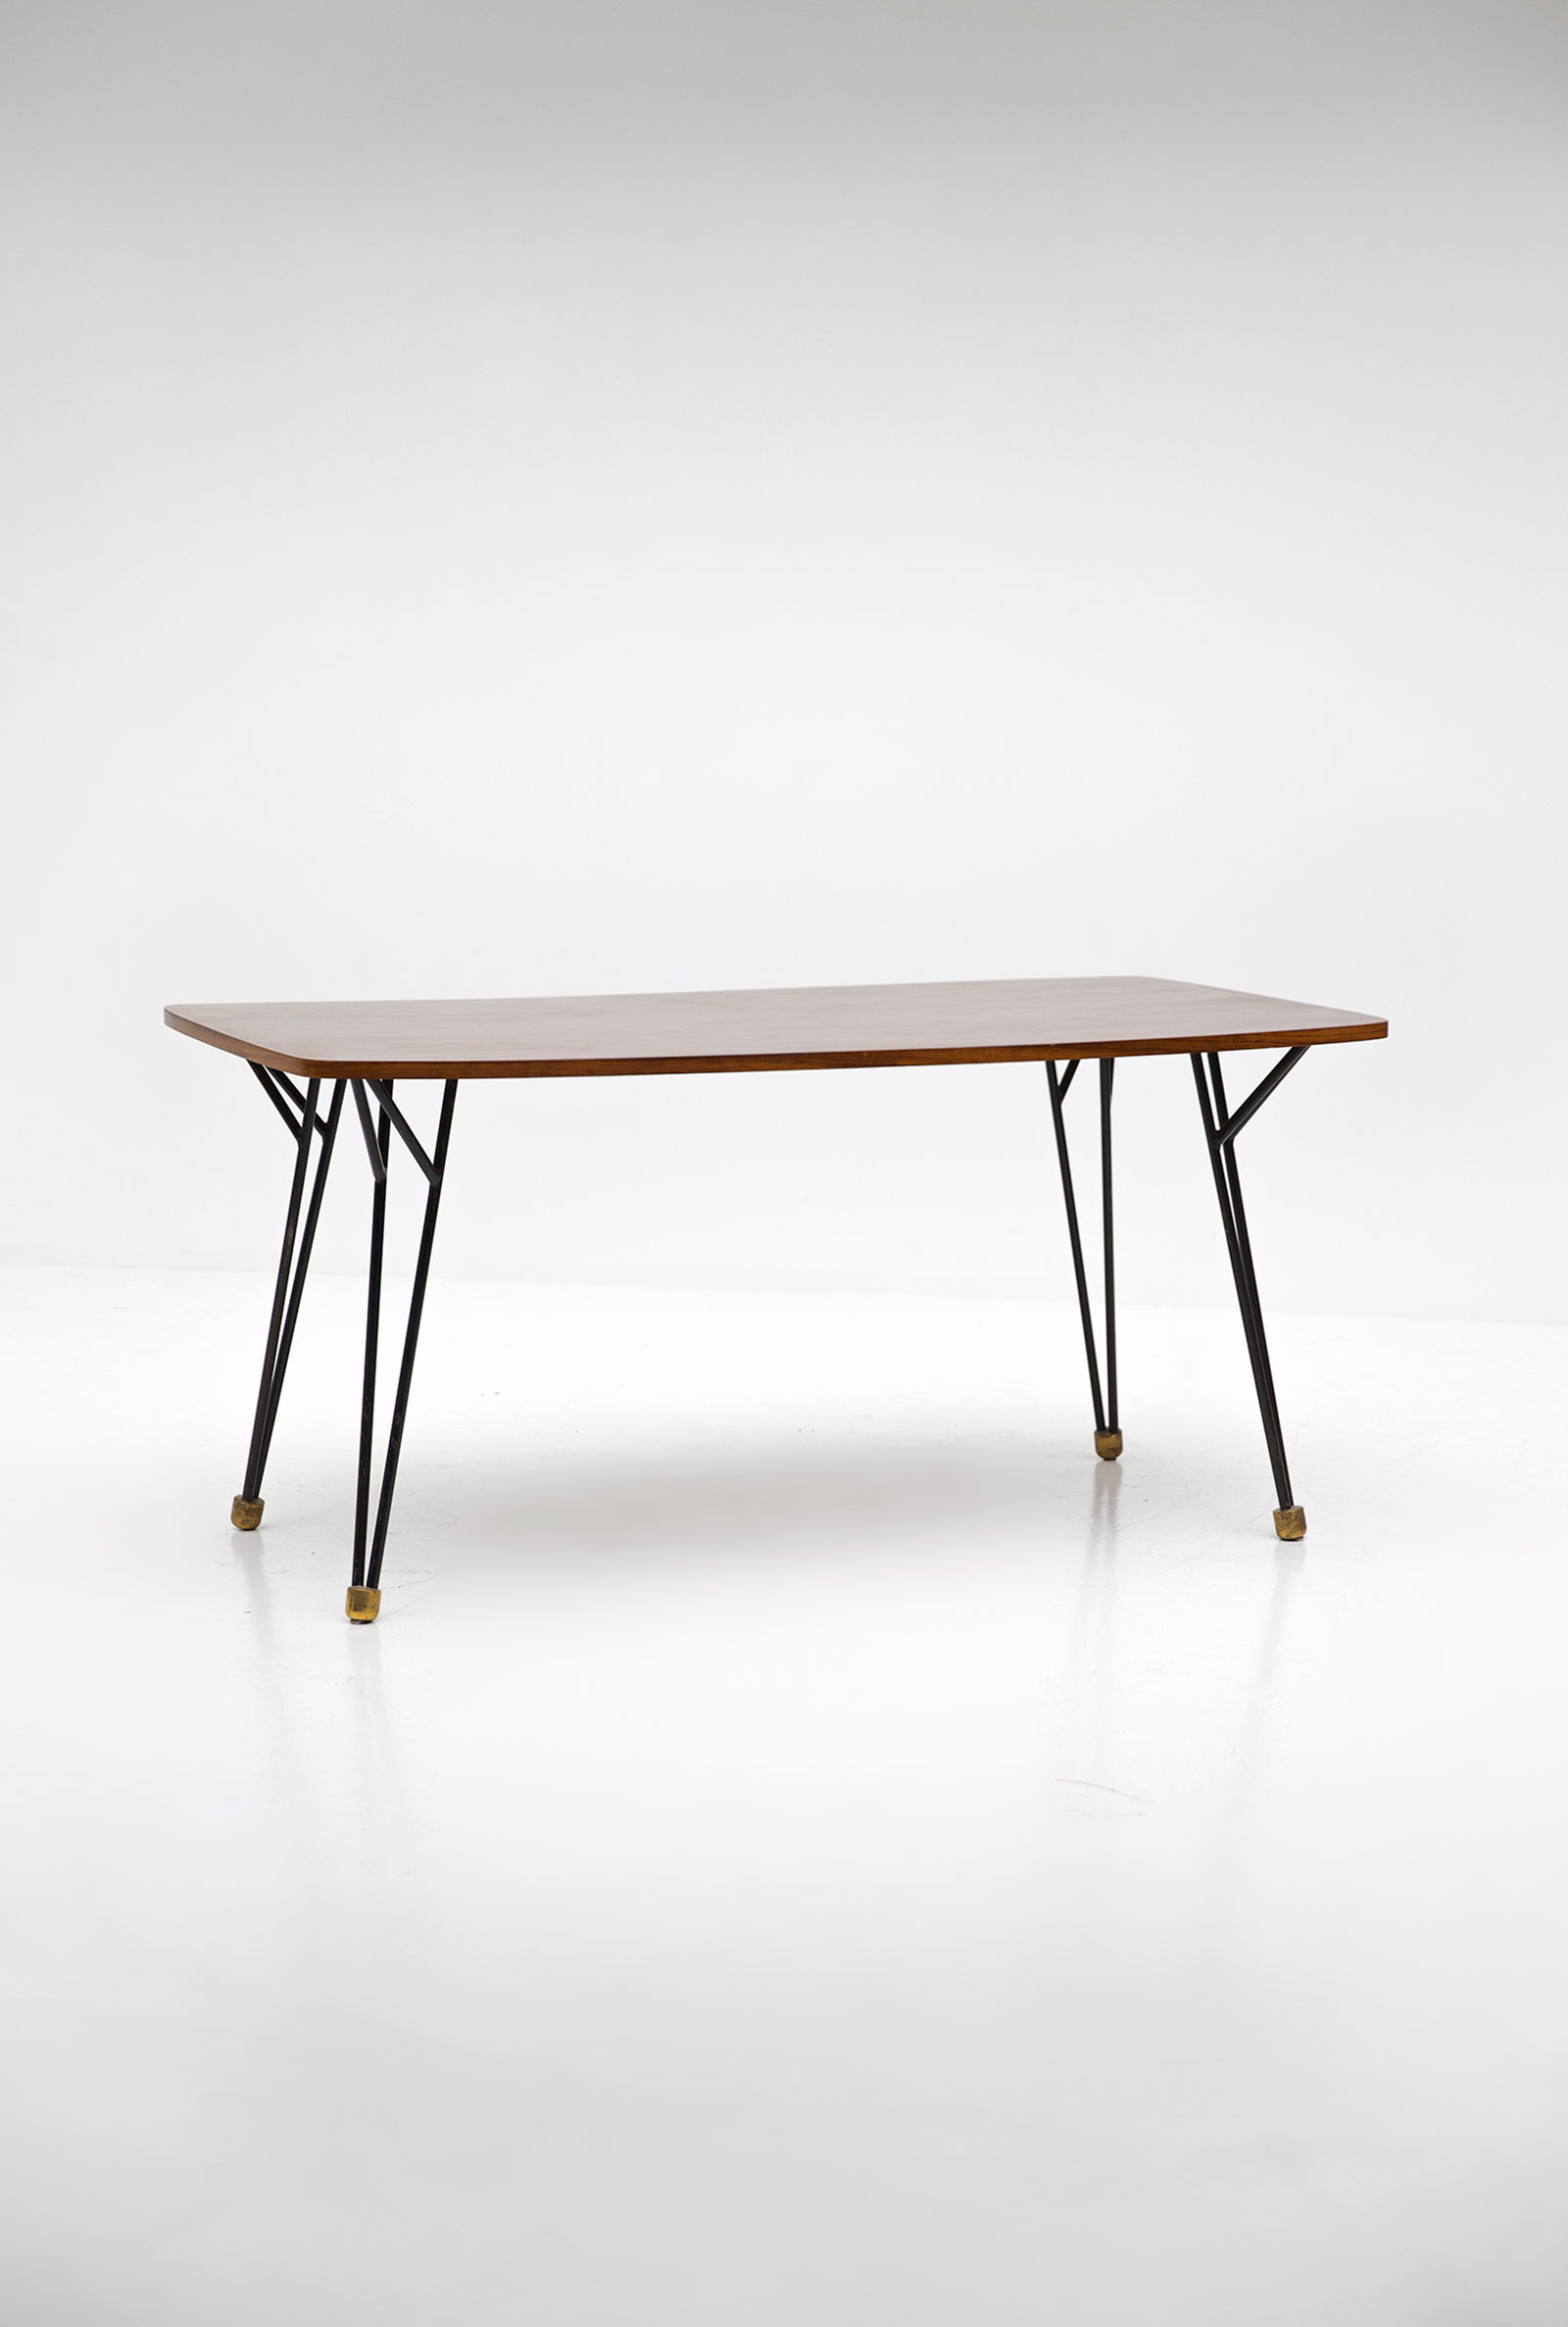 Alfred Hendrickx T3 dining table 50simage 1